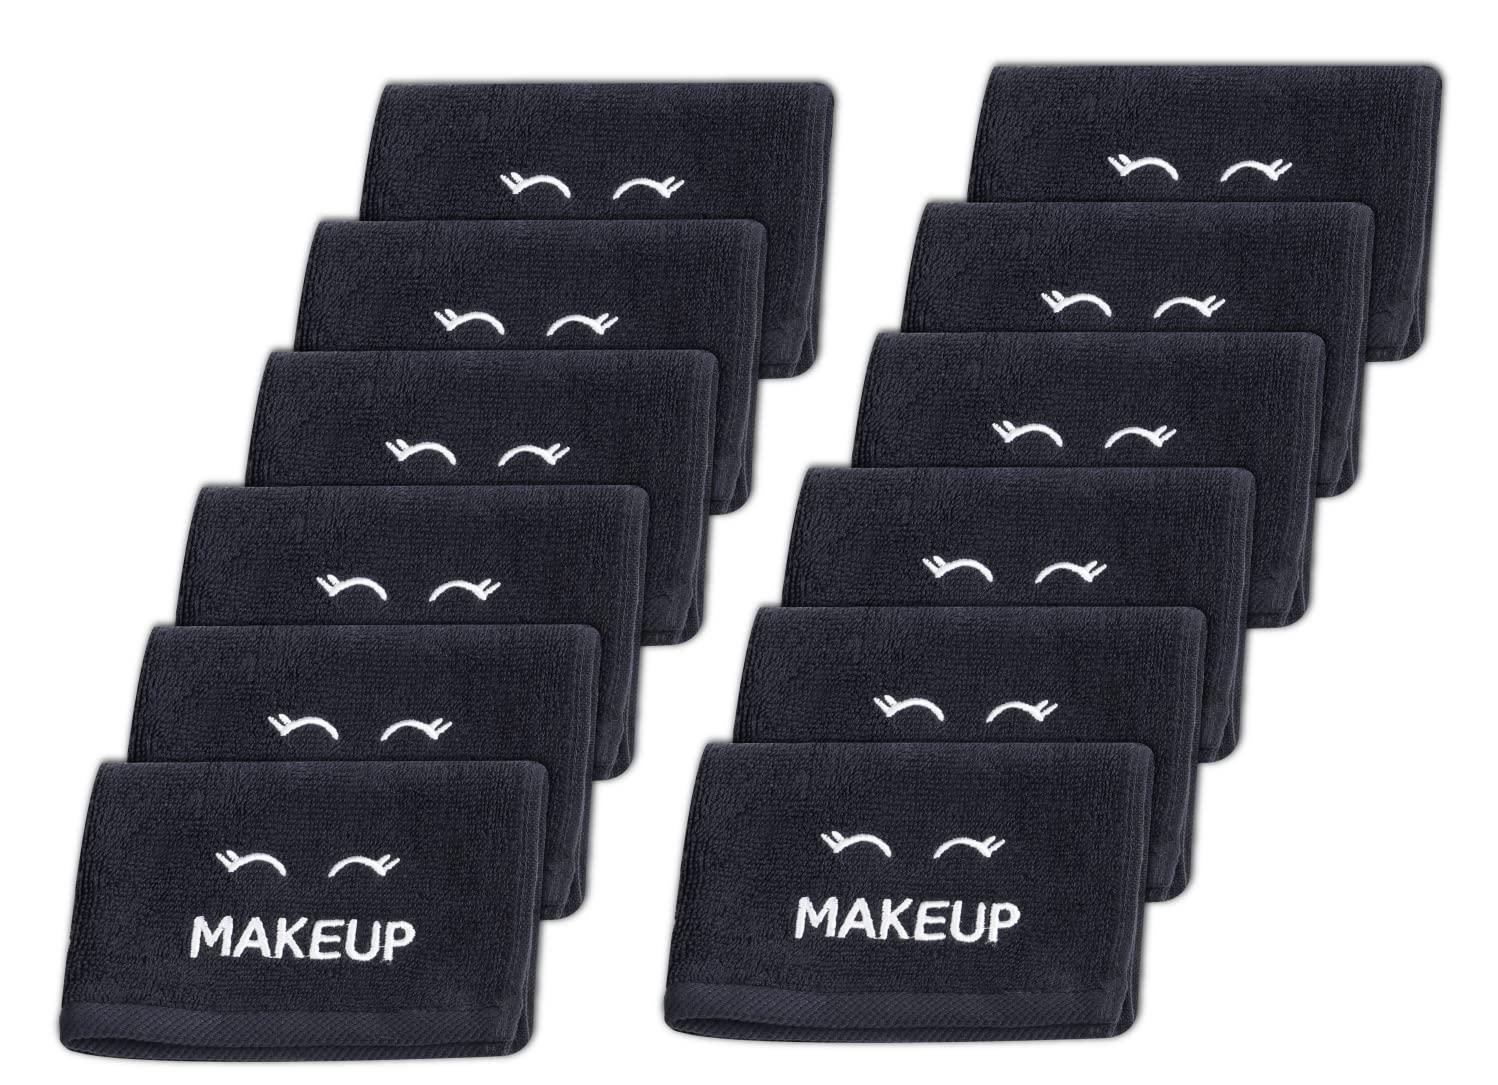 Bleach Safe Black Makeup Towels | Luxury Ultra Soft Cotton Face Washcloths Make Up Removal | 6 Pack, Size: 13 x 13